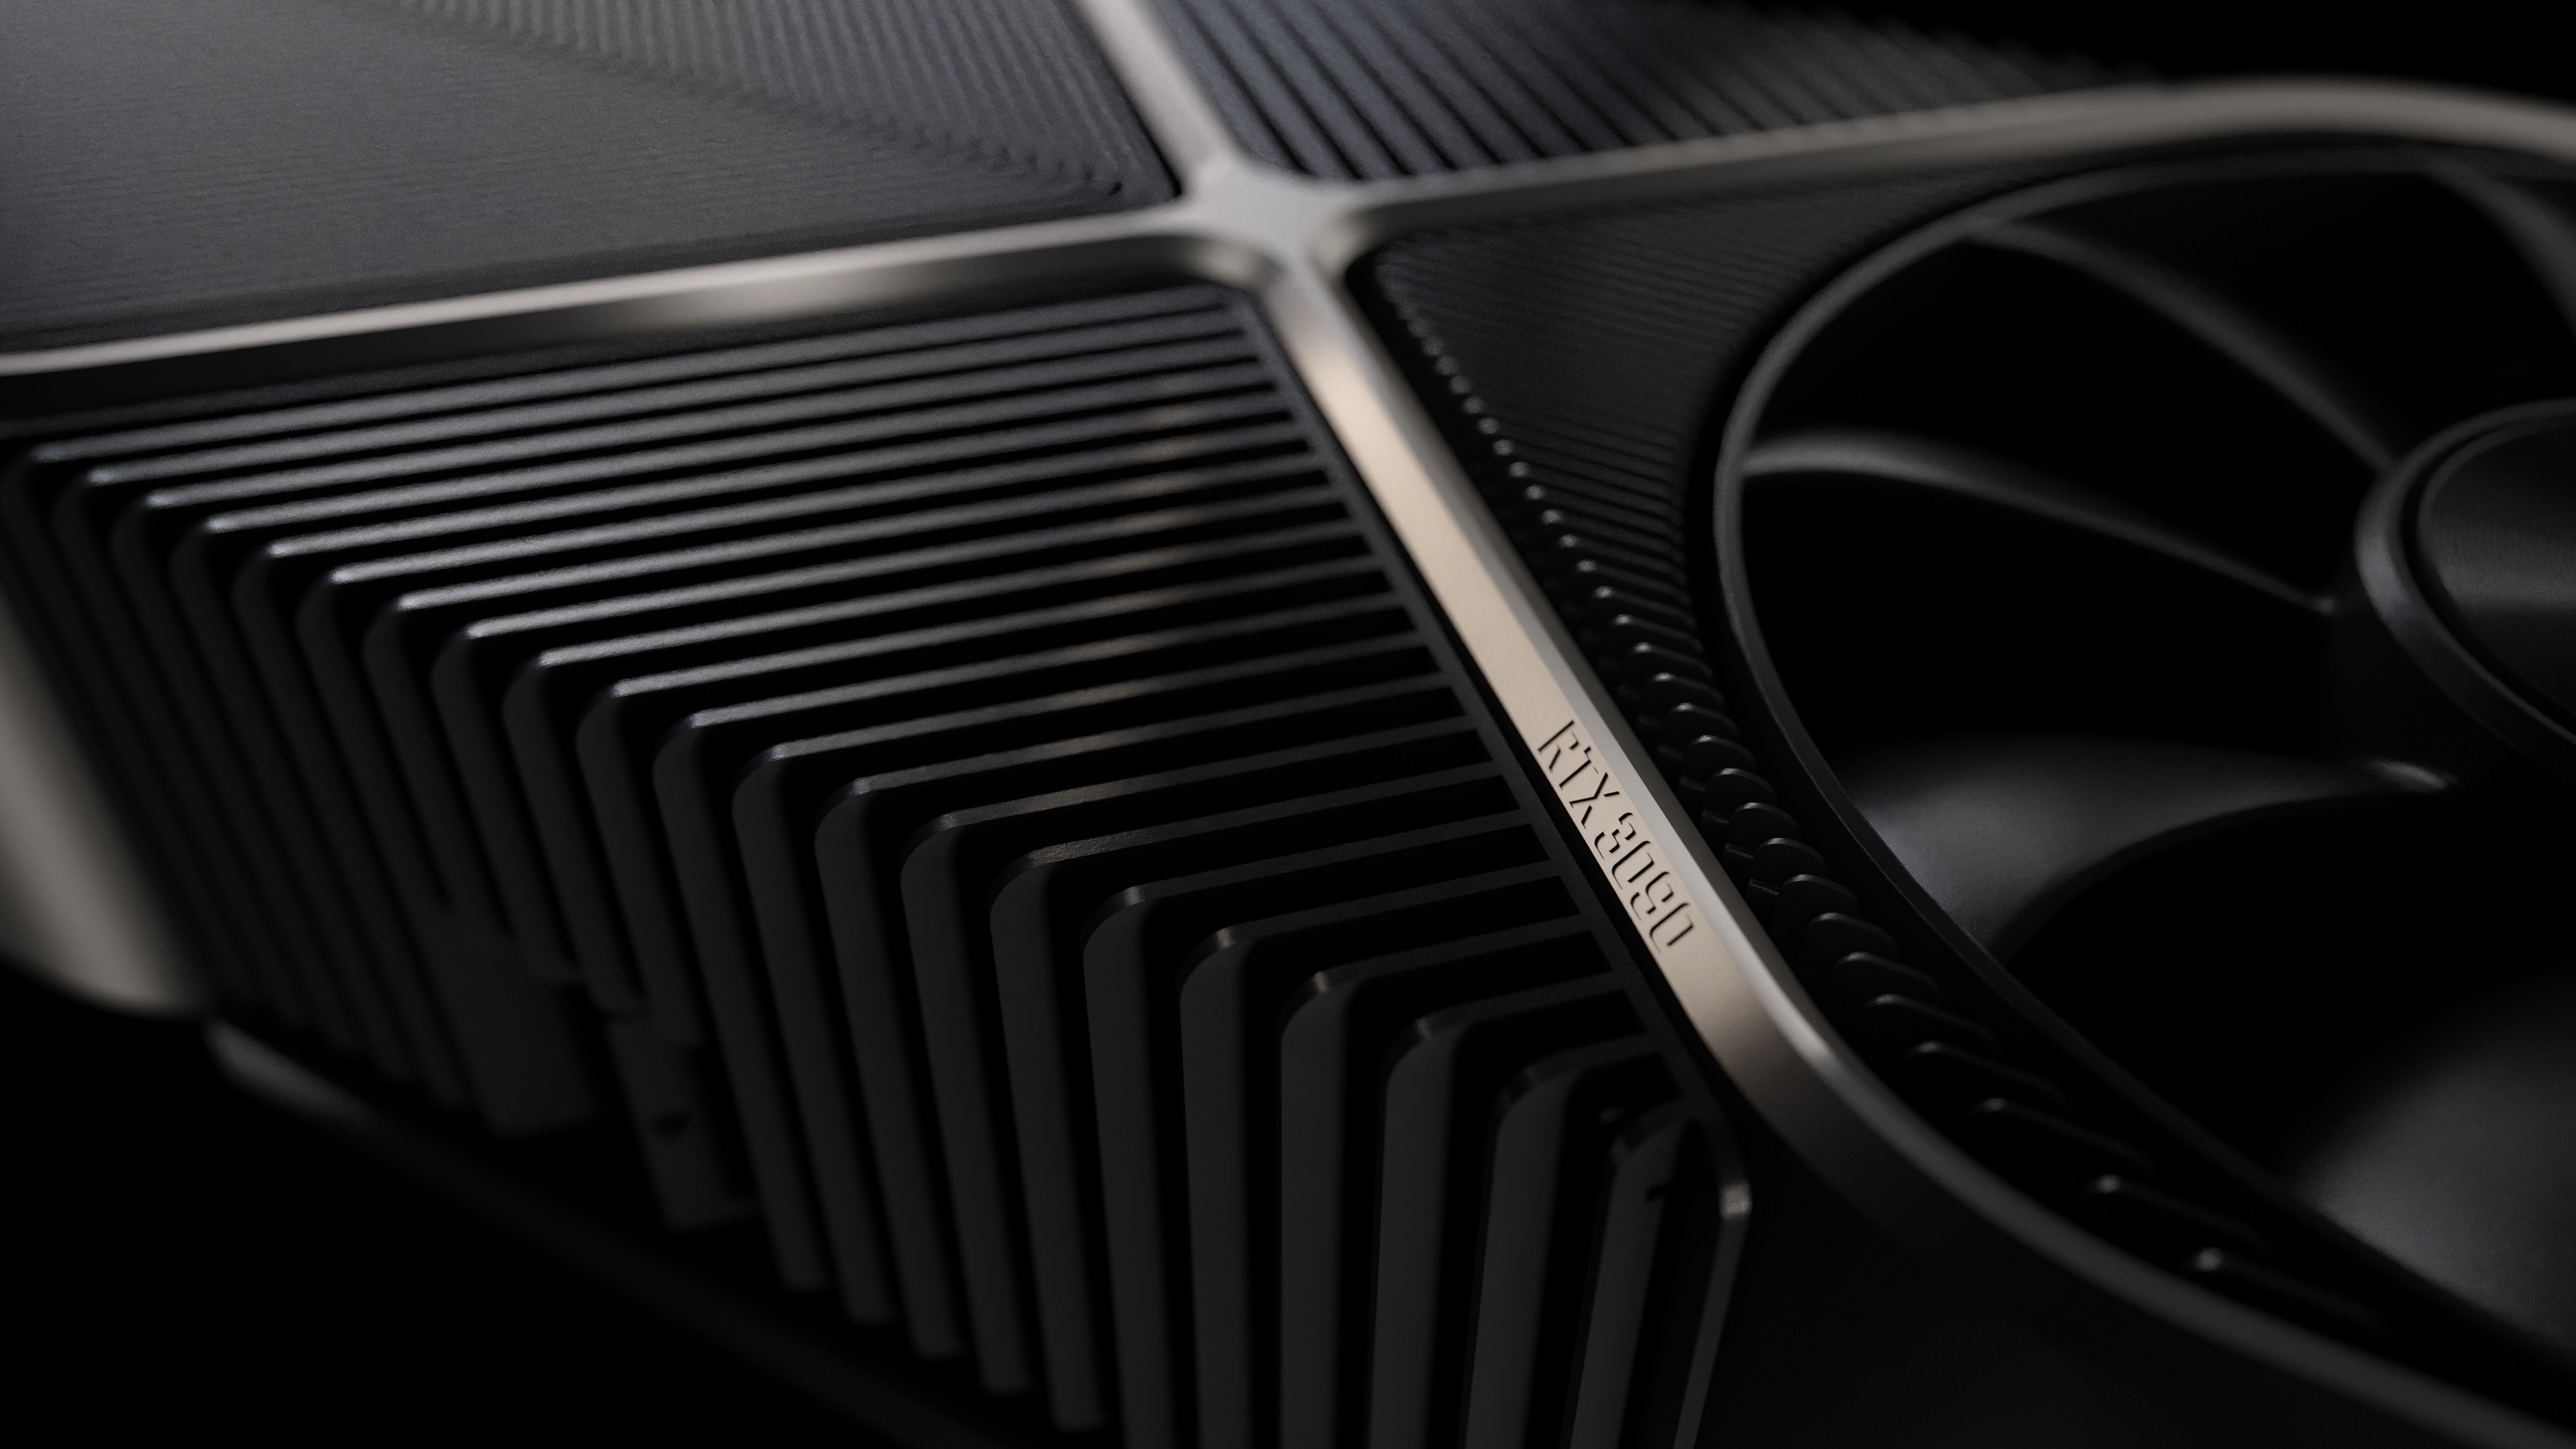 Nvidia GeForce RTX 3090 Founders Edition Graphics Card